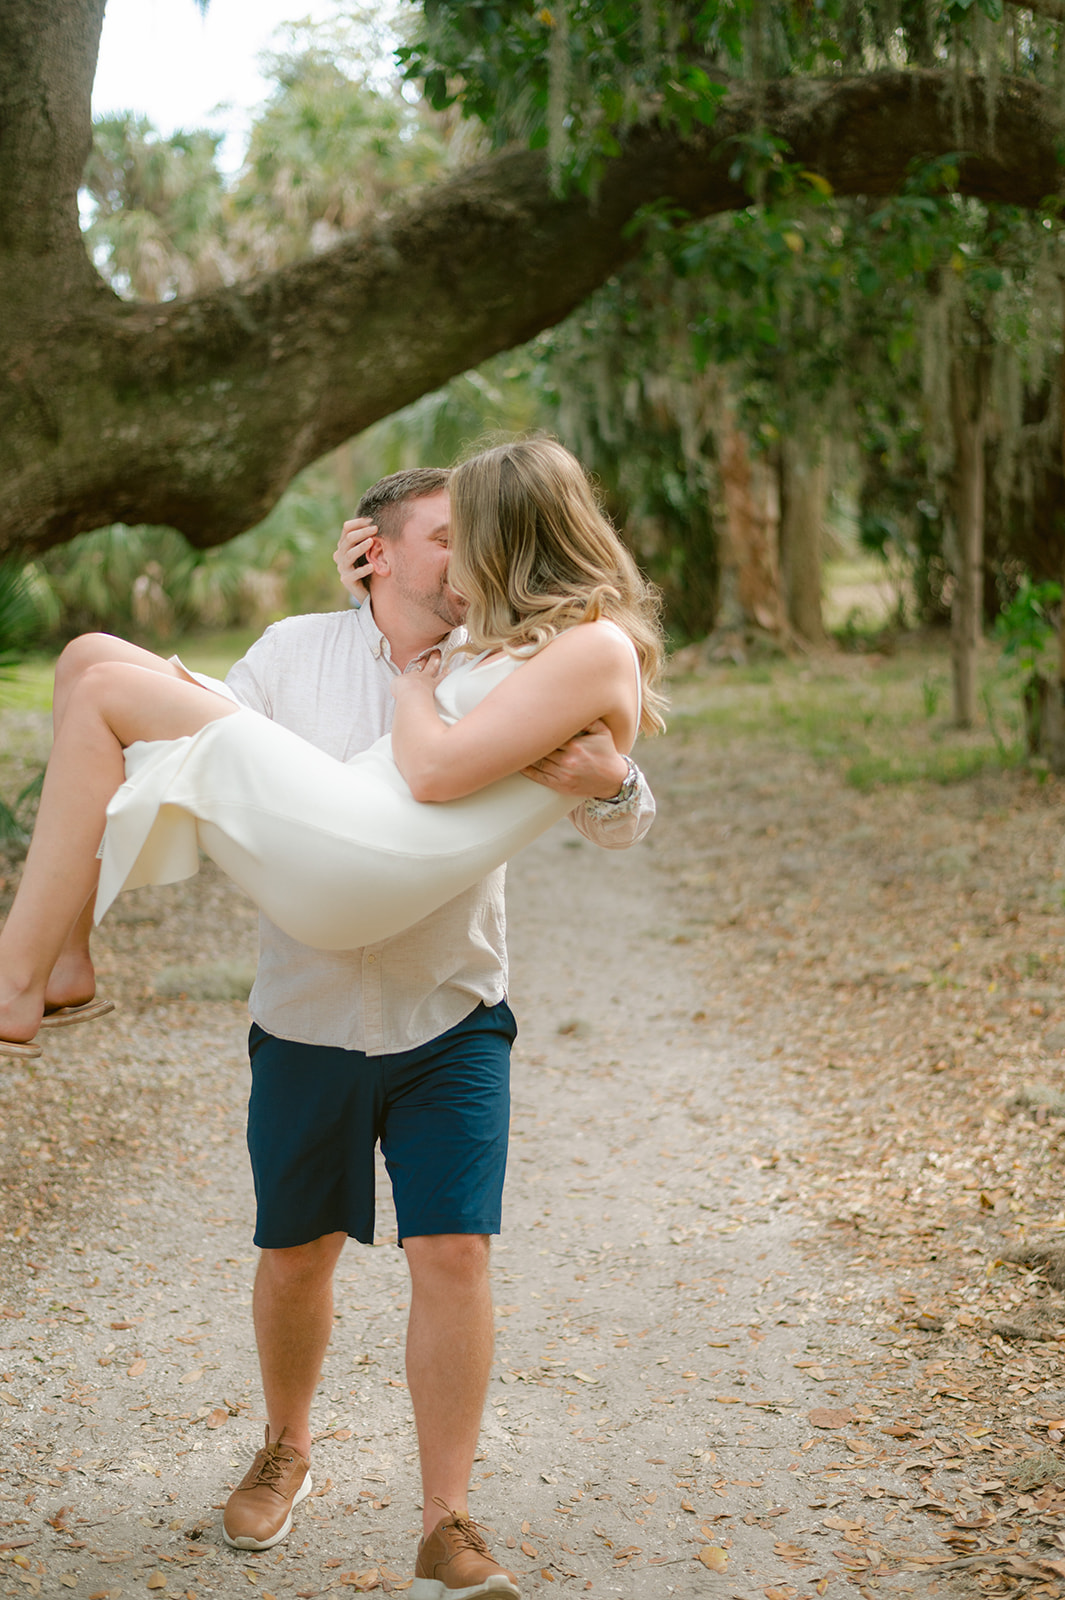 "Romantic waterfront engagement photo in Tampa's Philippe Park"
